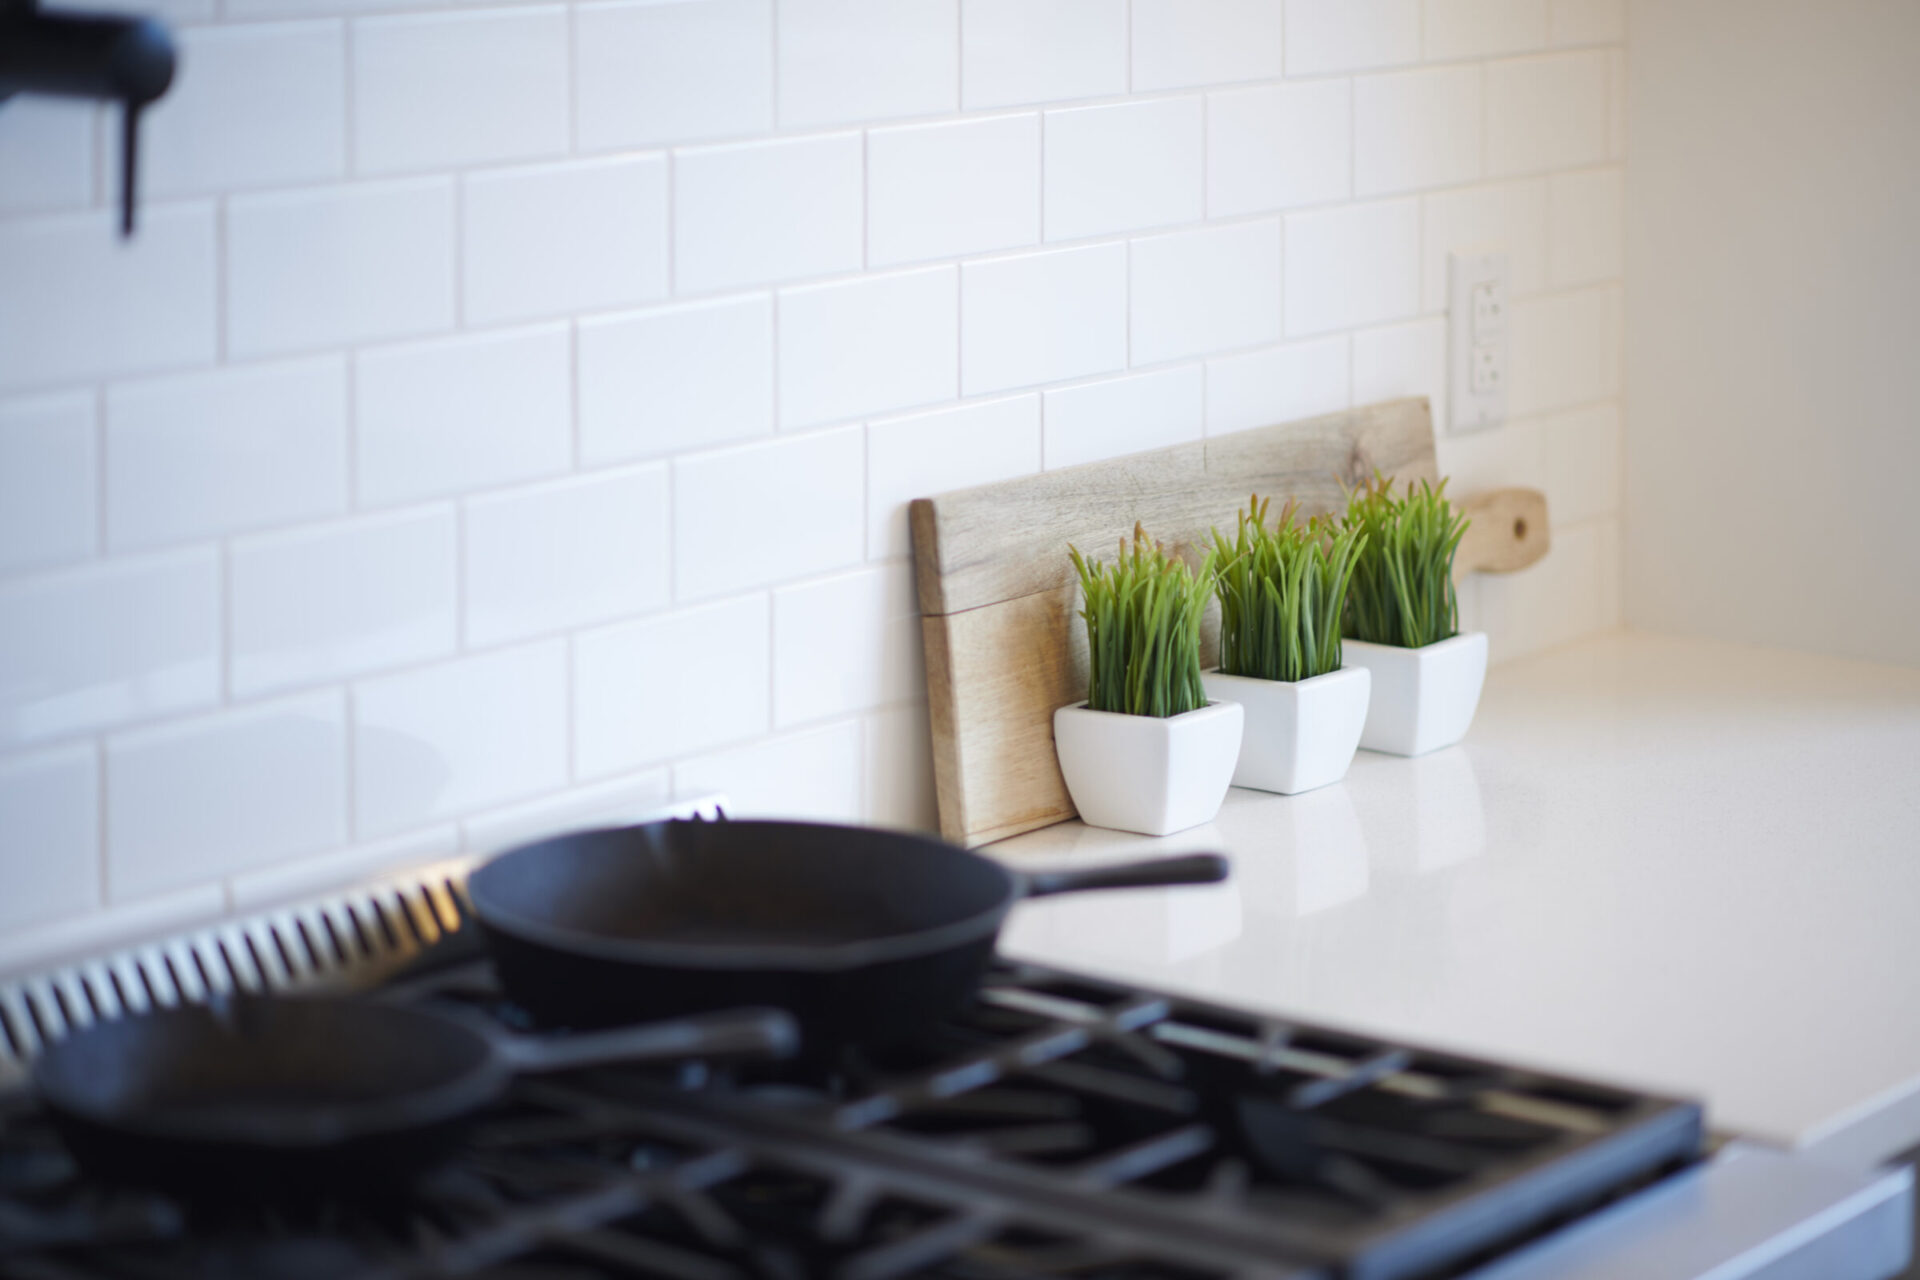 A modern kitchen counter featuring a gas stove, two cast iron pans, and three white pots with green plants against a white subway tile backsplash.